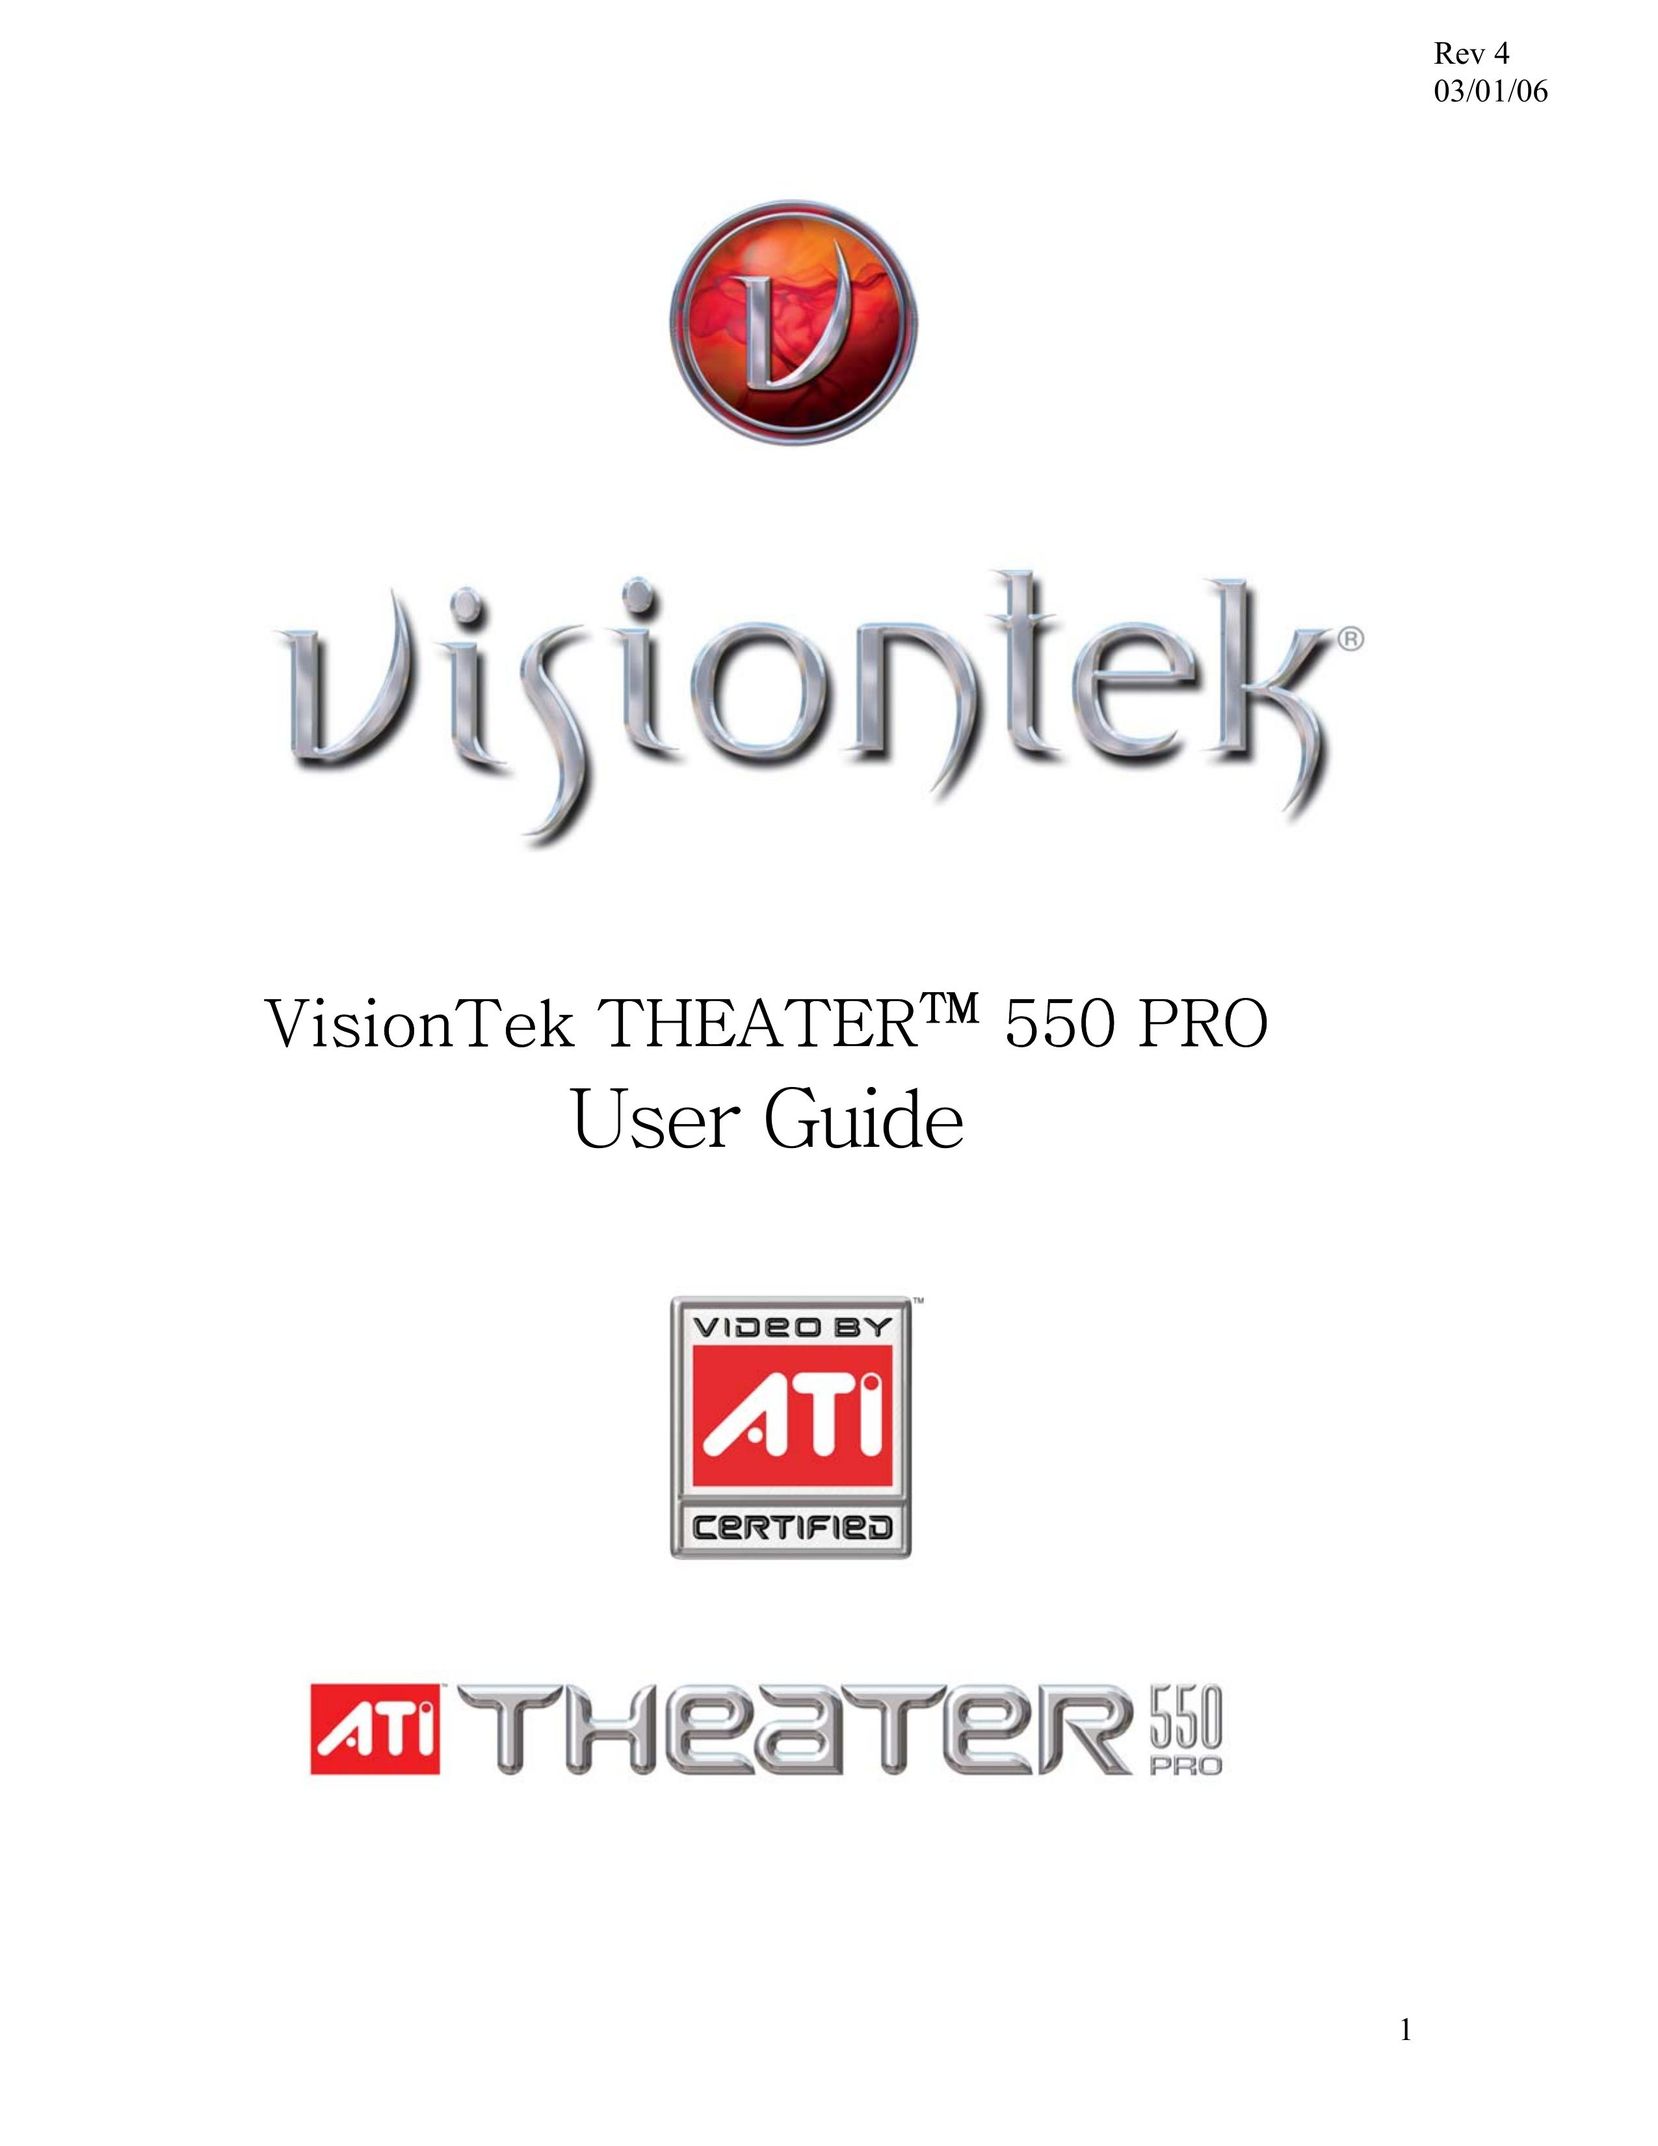 VisionTek Theater 550 PRO Home Theater System User Manual